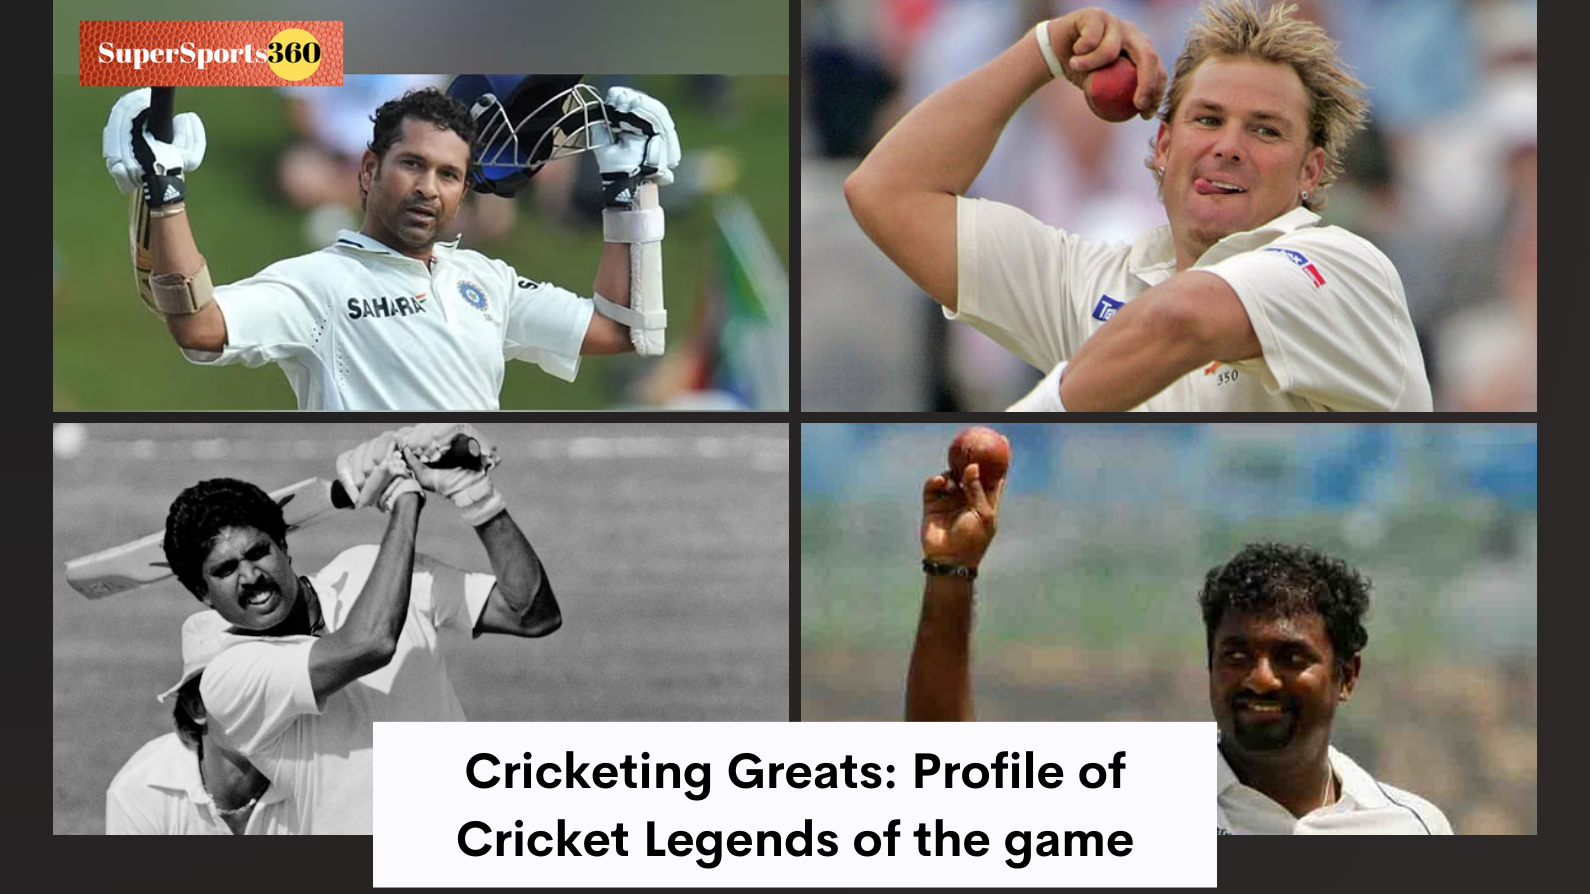 Cricketing Greats: Profile of Cricket Legends of the game